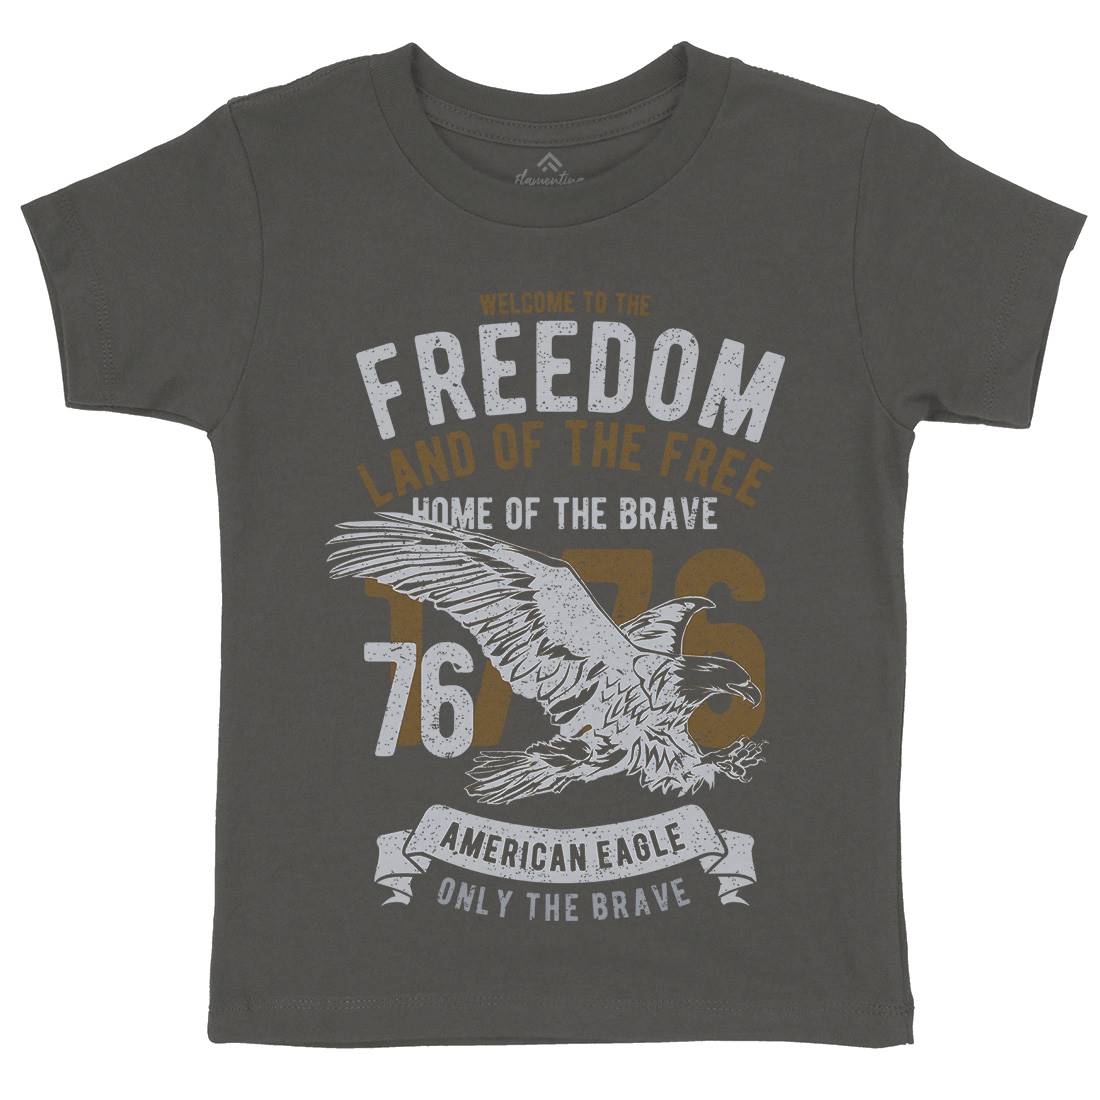 Welcome To The Freedom Kids Crew Neck T-Shirt Army A790